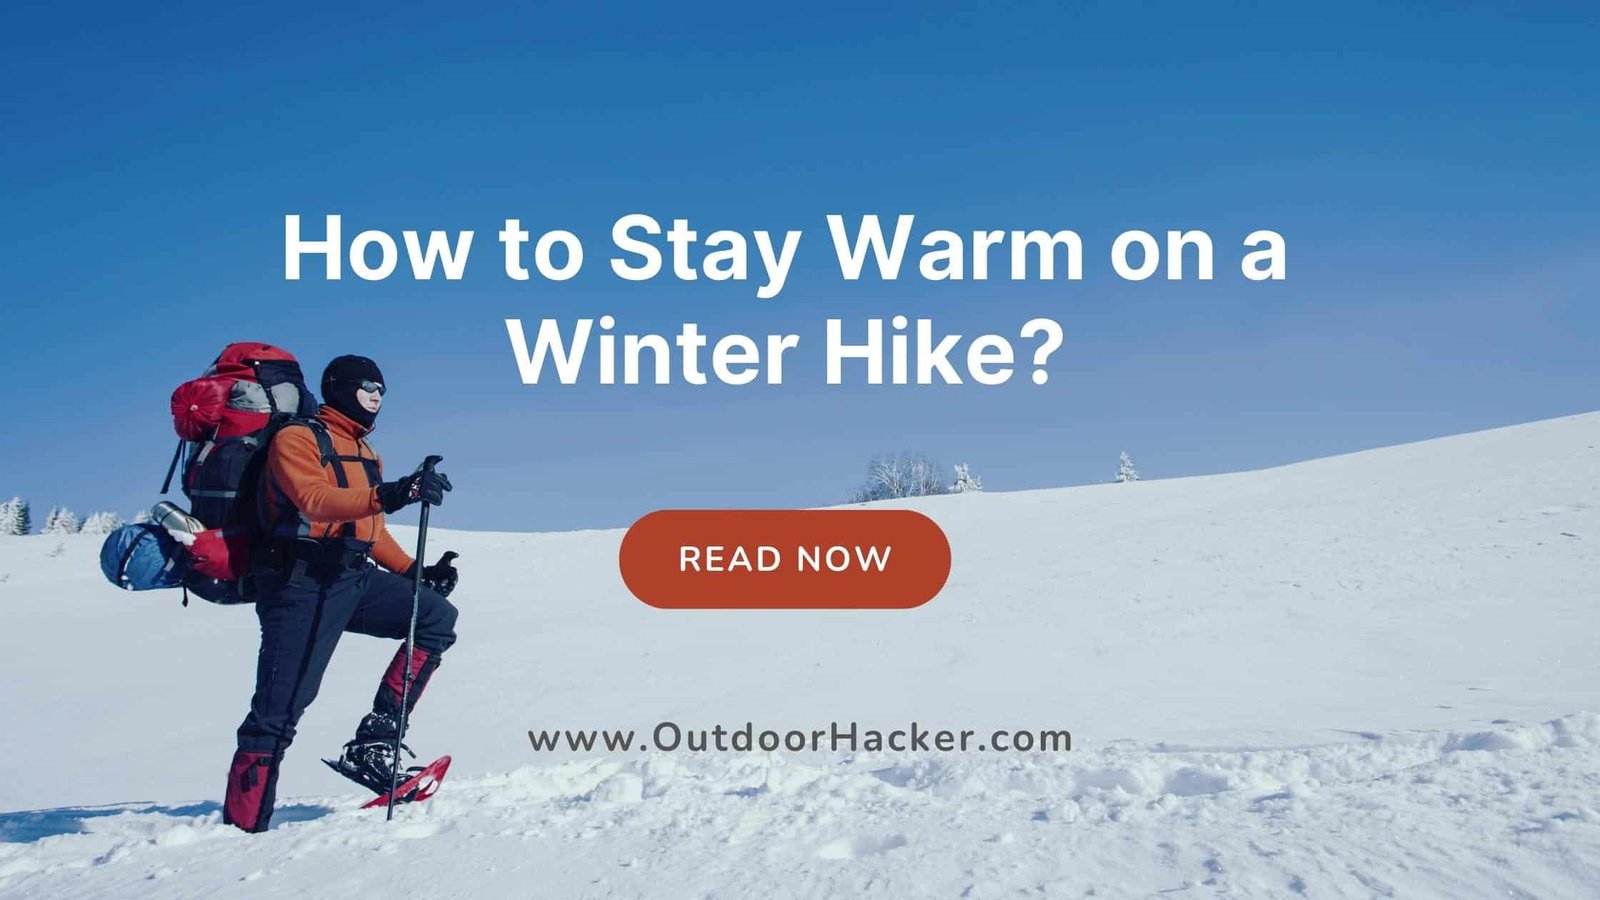 How to Stay Warm on a Winter Hike